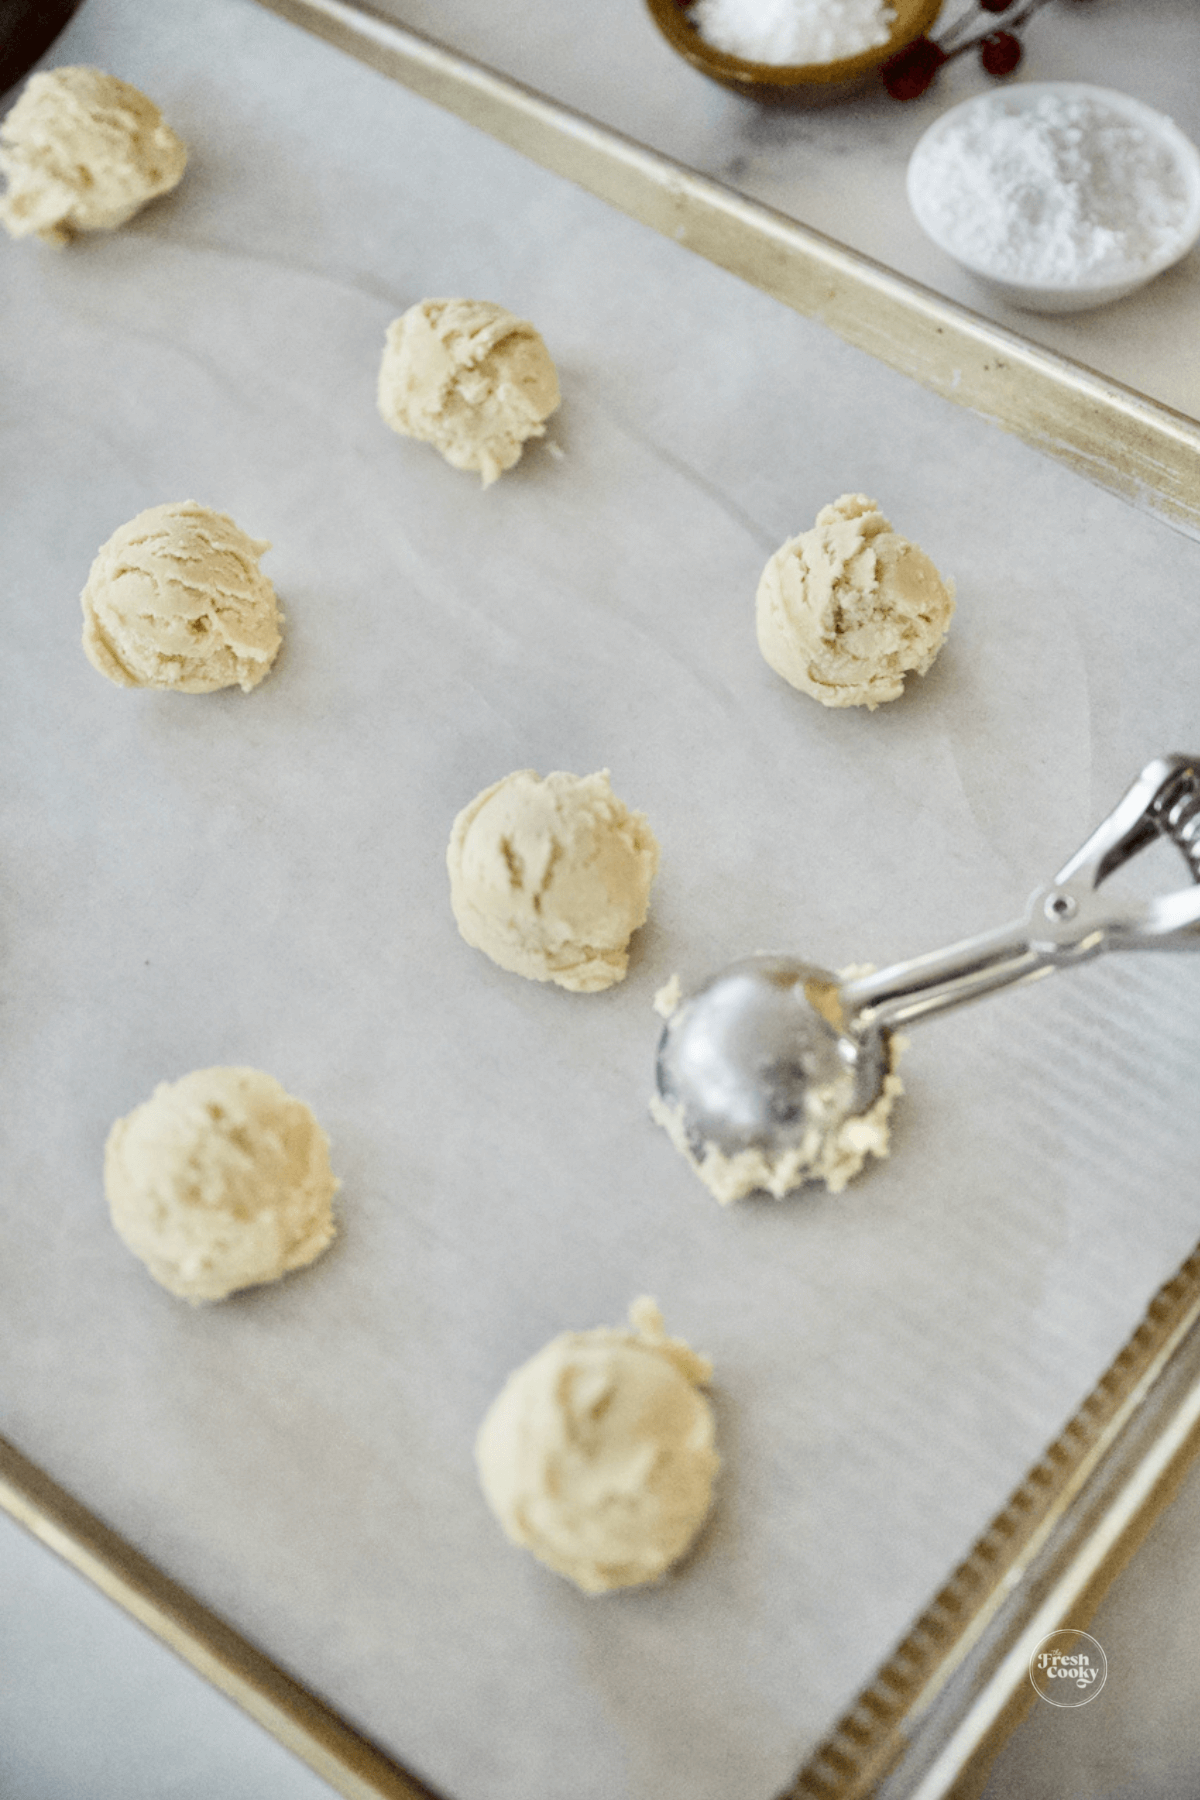 Scooping small balls of cookie dough onto parchment lined baking sheets.